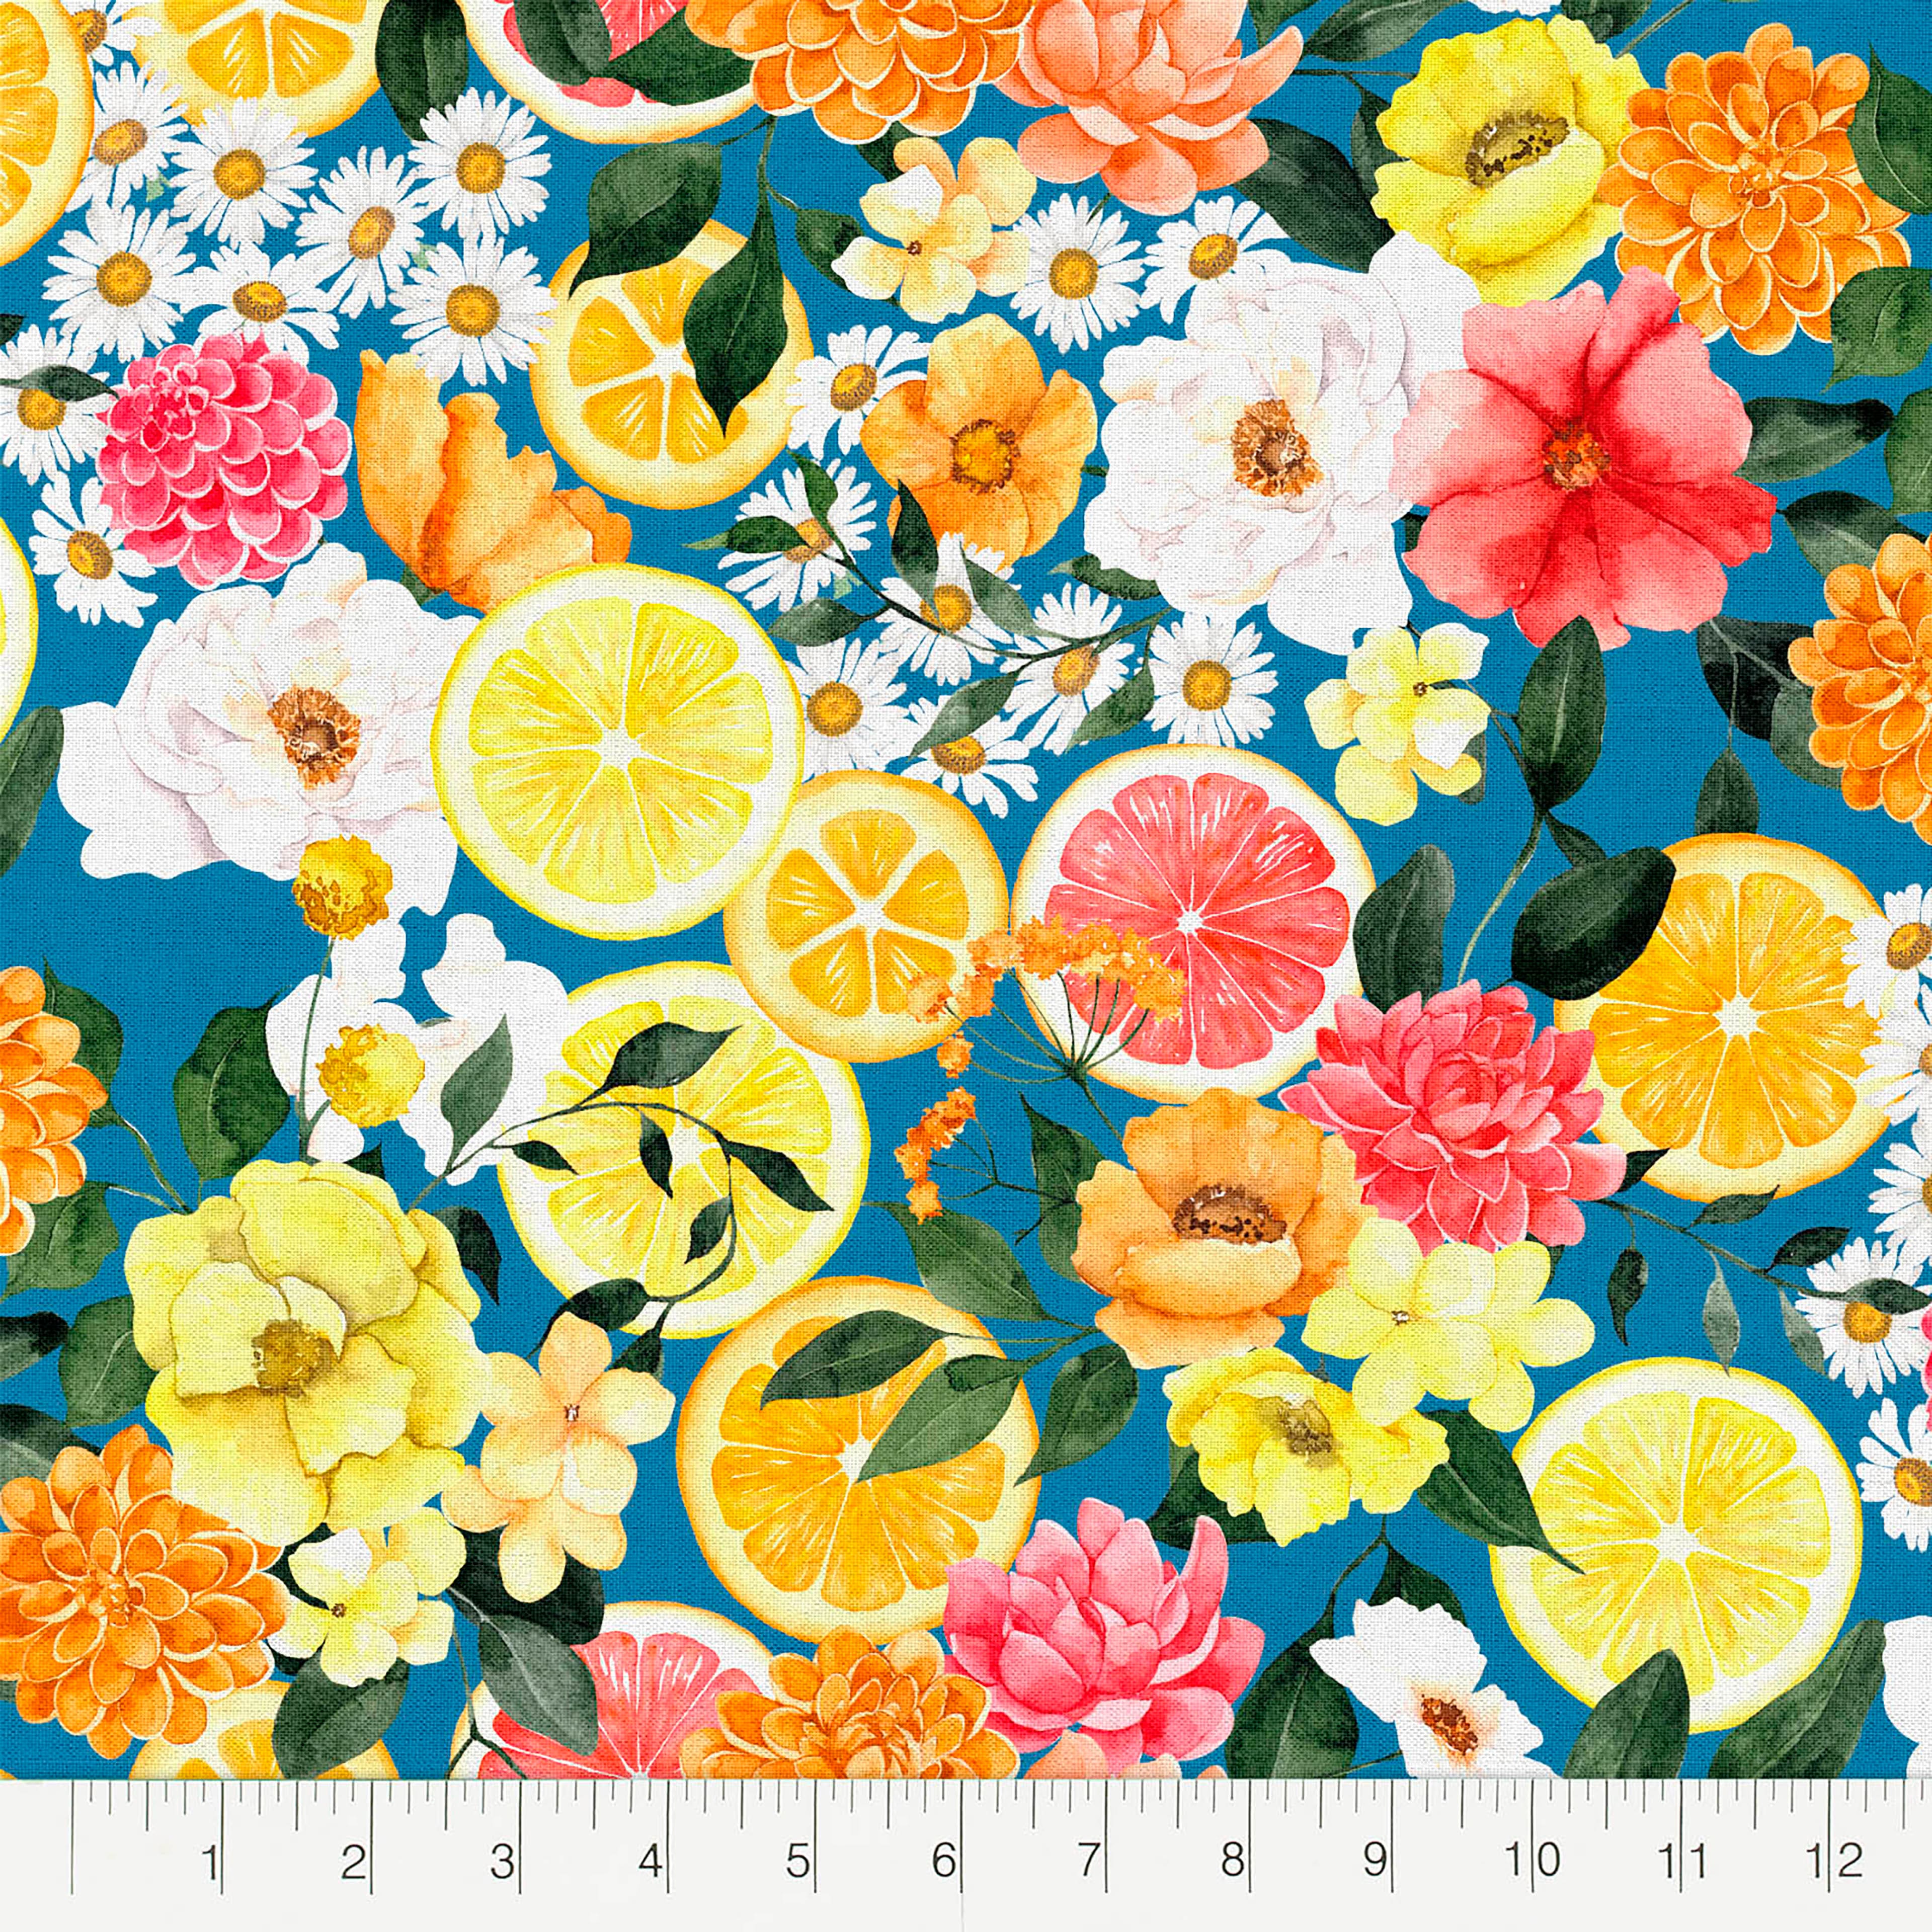 Fabric Editions Blue In Bloom Cotton Fabric